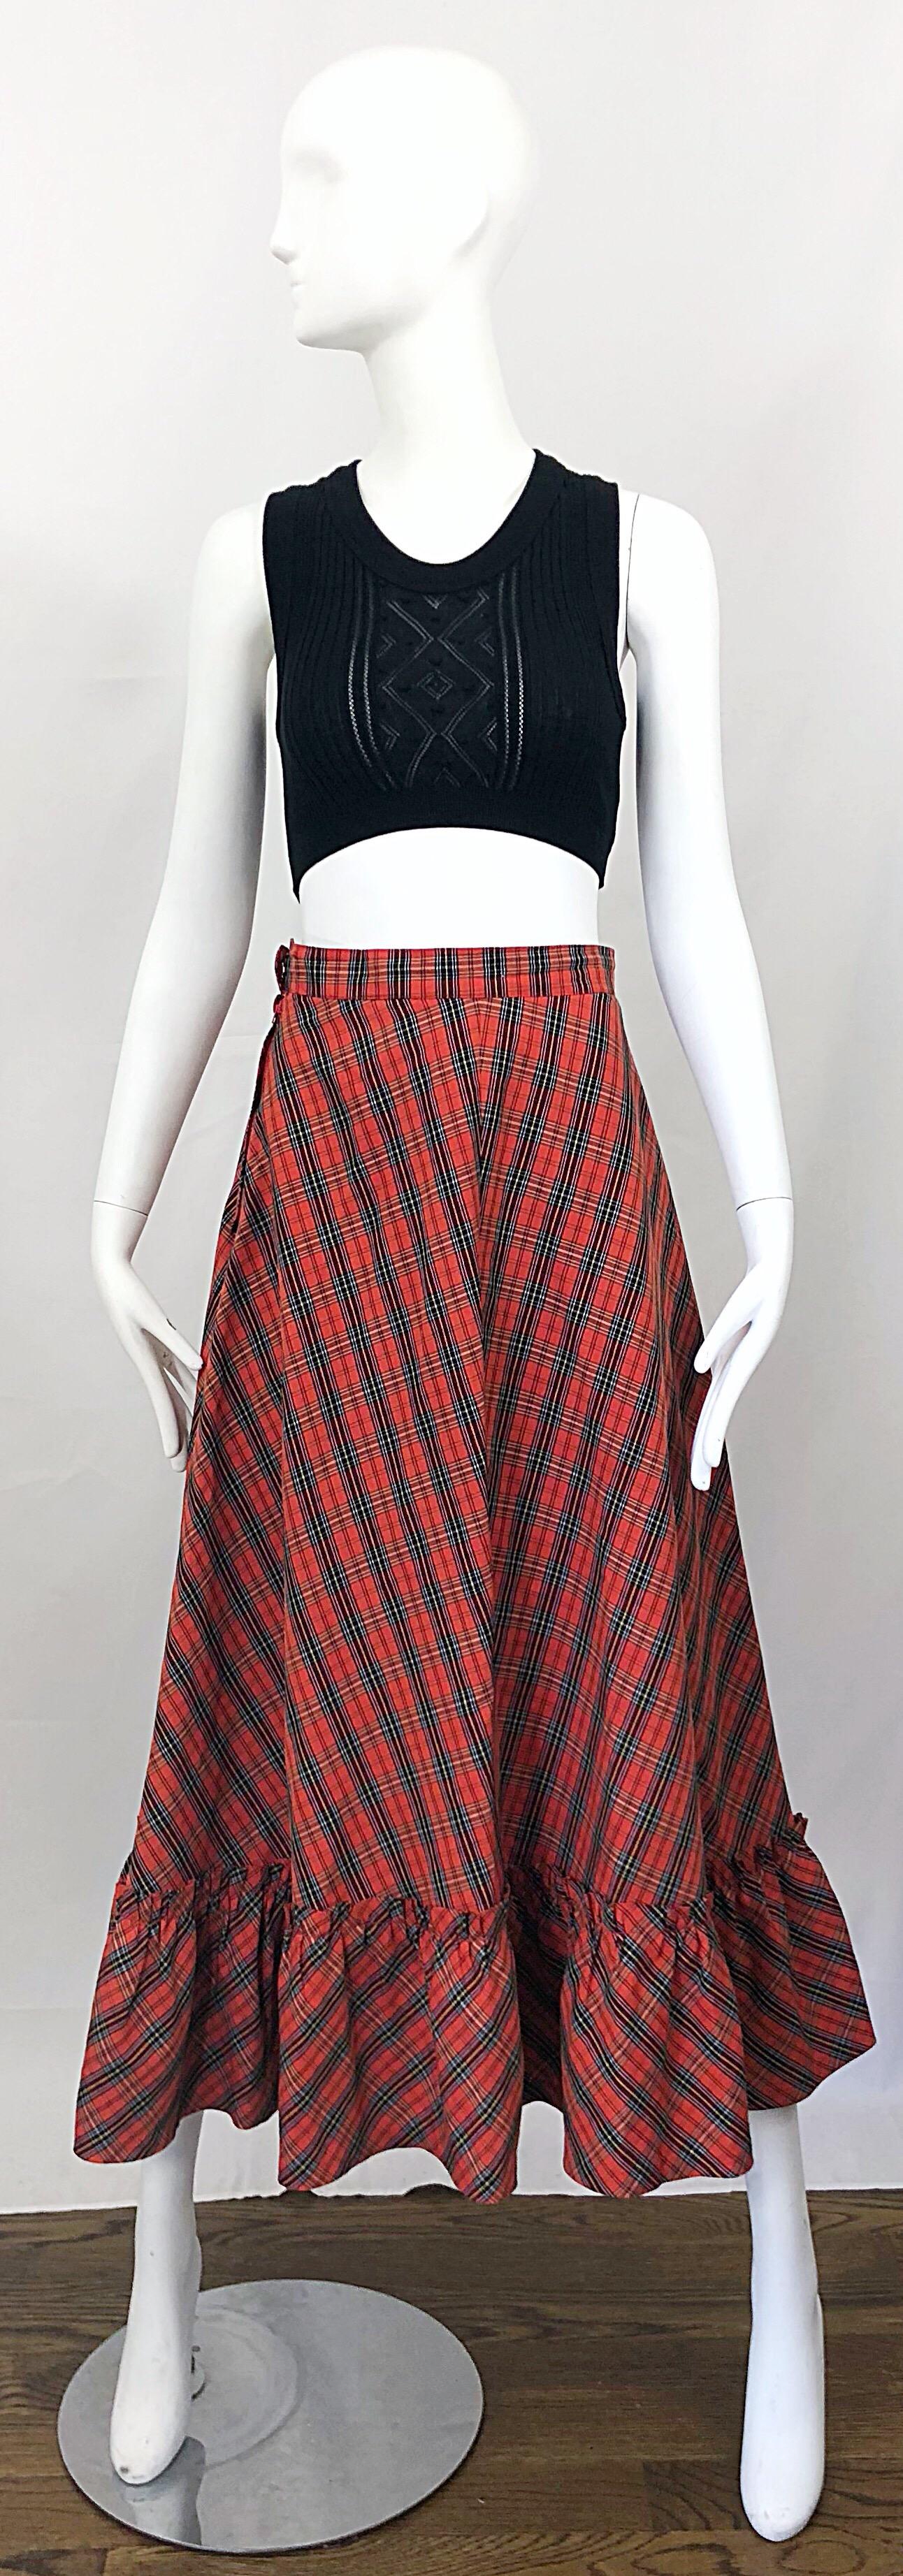 Perfect for the holidays! This red plaid 1970s maxi skirt has so much going for it. Classic plaid that forms a contrast when the fabric meets at the center. Soft cotton voile fabric. Perfect for Christmas / Holidays! Chic ruffle hem. Metal zipper up